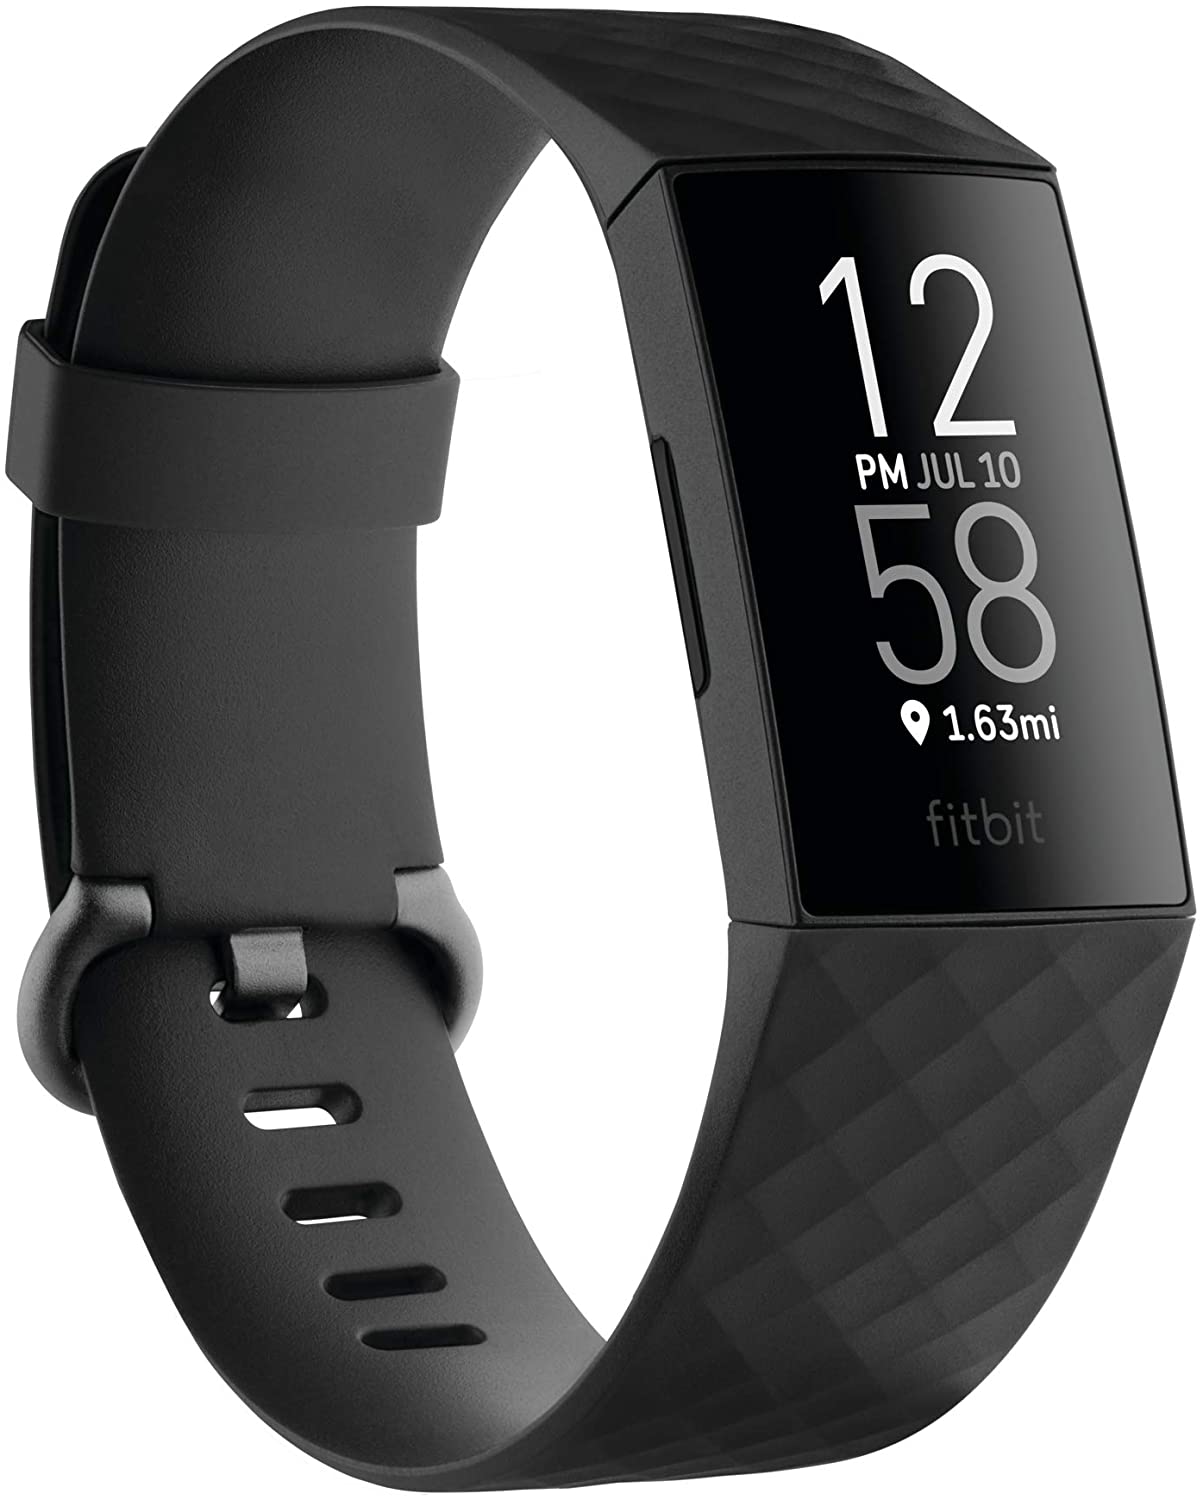 Best Fitness Tracker for Small Wrists